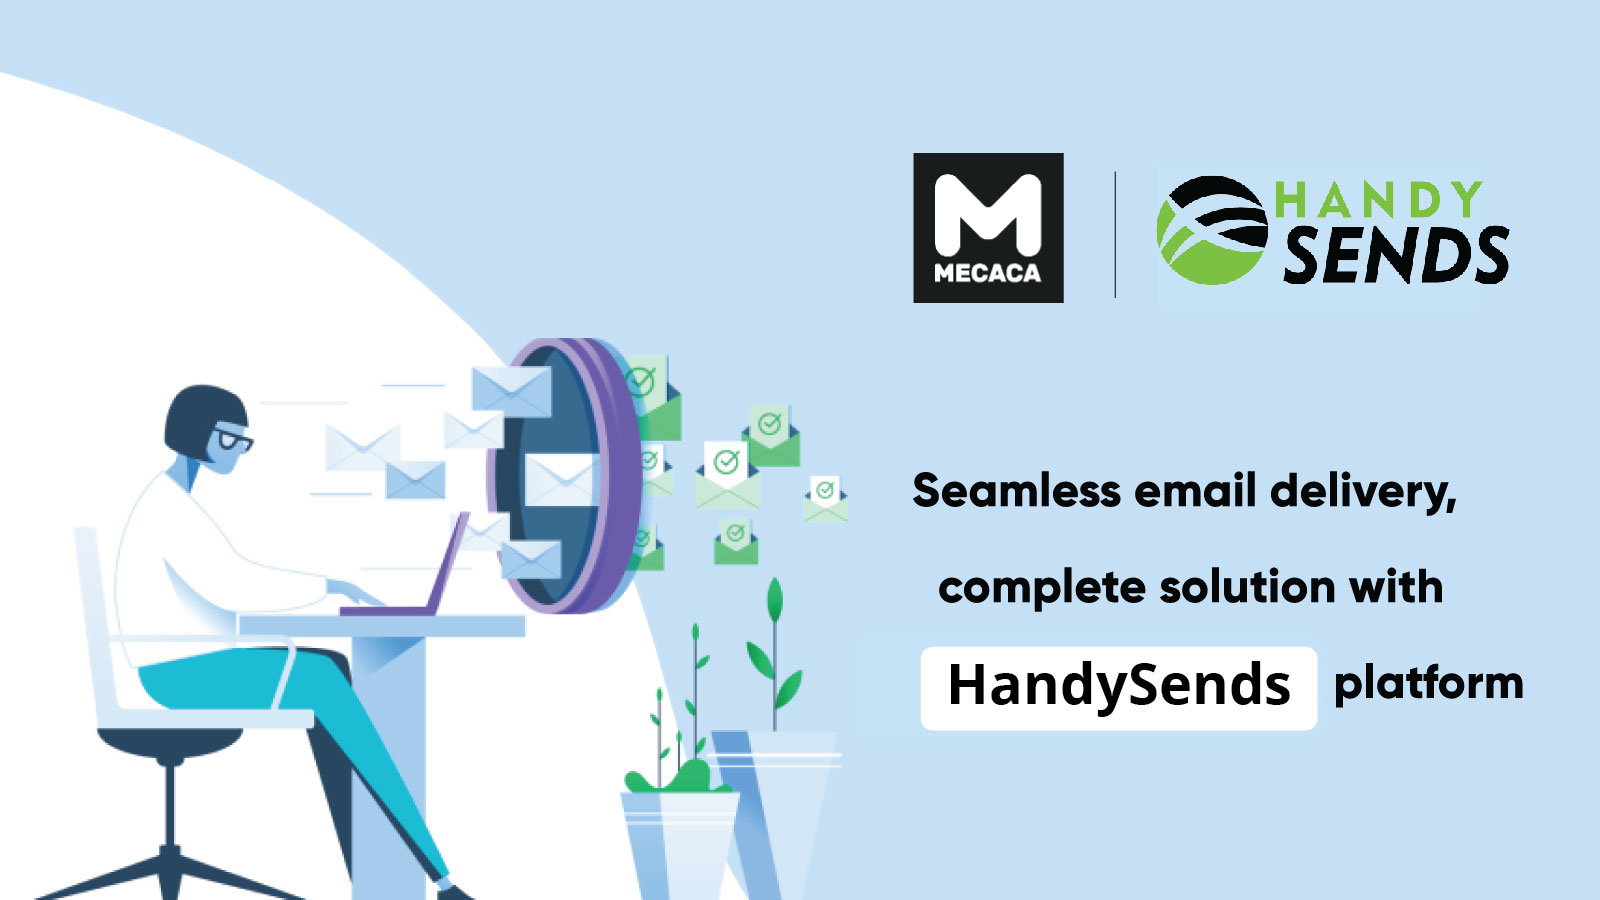 Seamless email delivery, complete solution with Twilio SendGrid platform